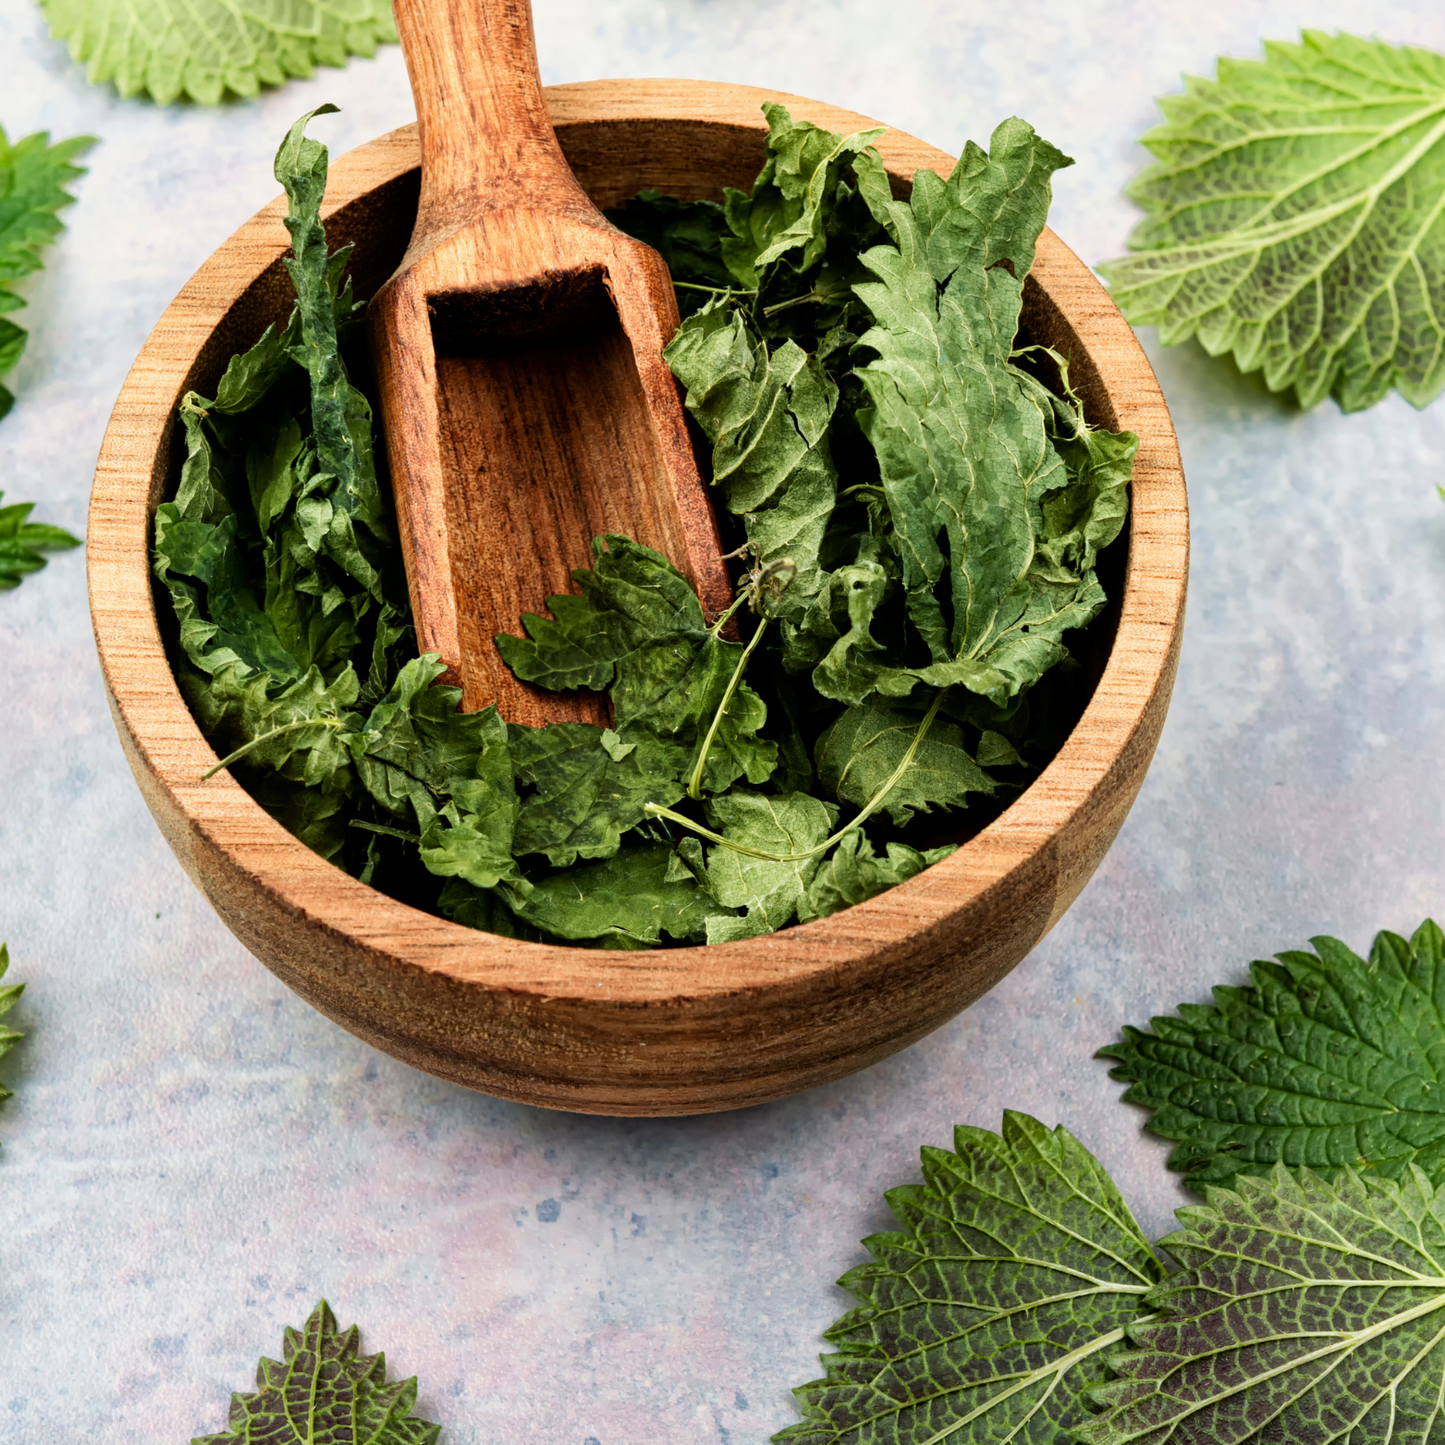 Stinging Nettle Leaf Herb, Nettle Leaf, Dried Herbs, Food Grade Herbs, Herbs and Spices, Loose Leaf Herbs